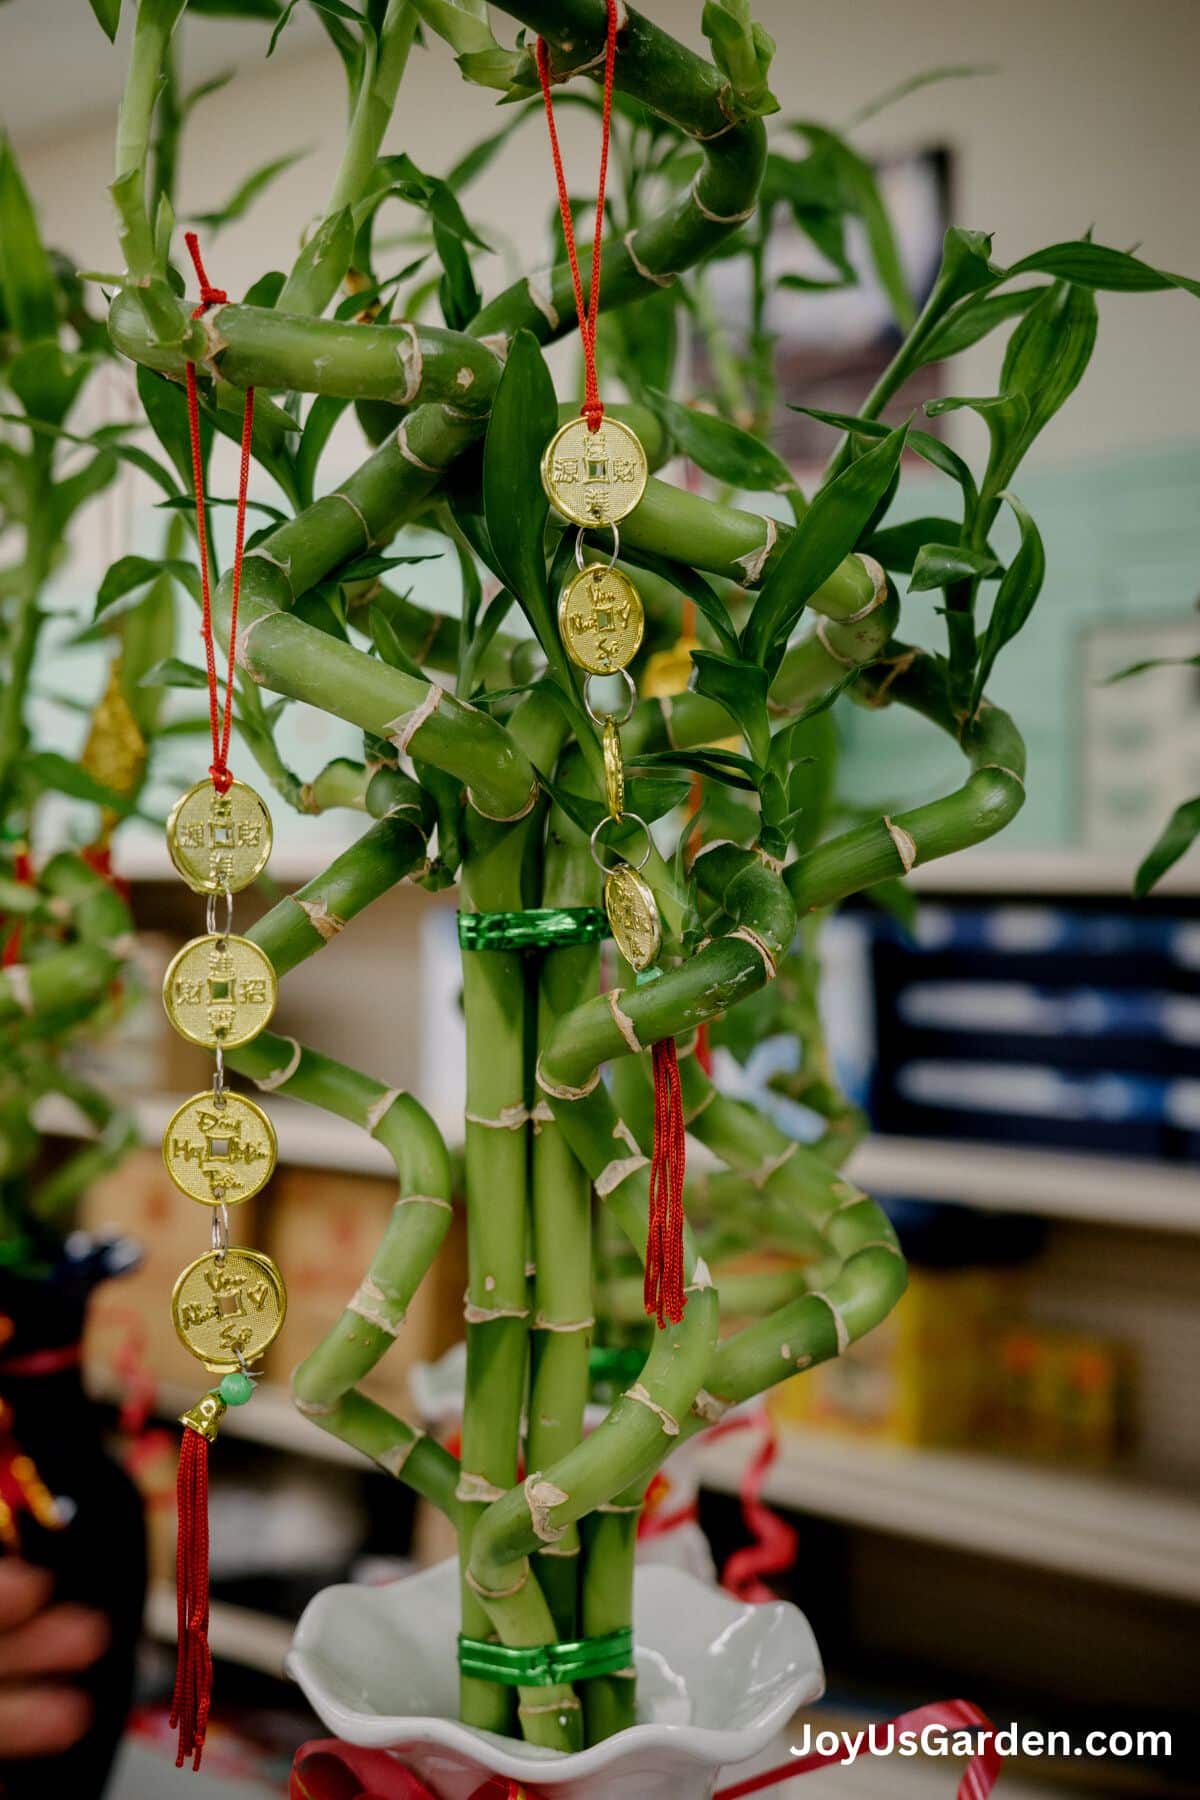 spiral stalk lucky bamboo growing in water adorned with gold charms and ribbons